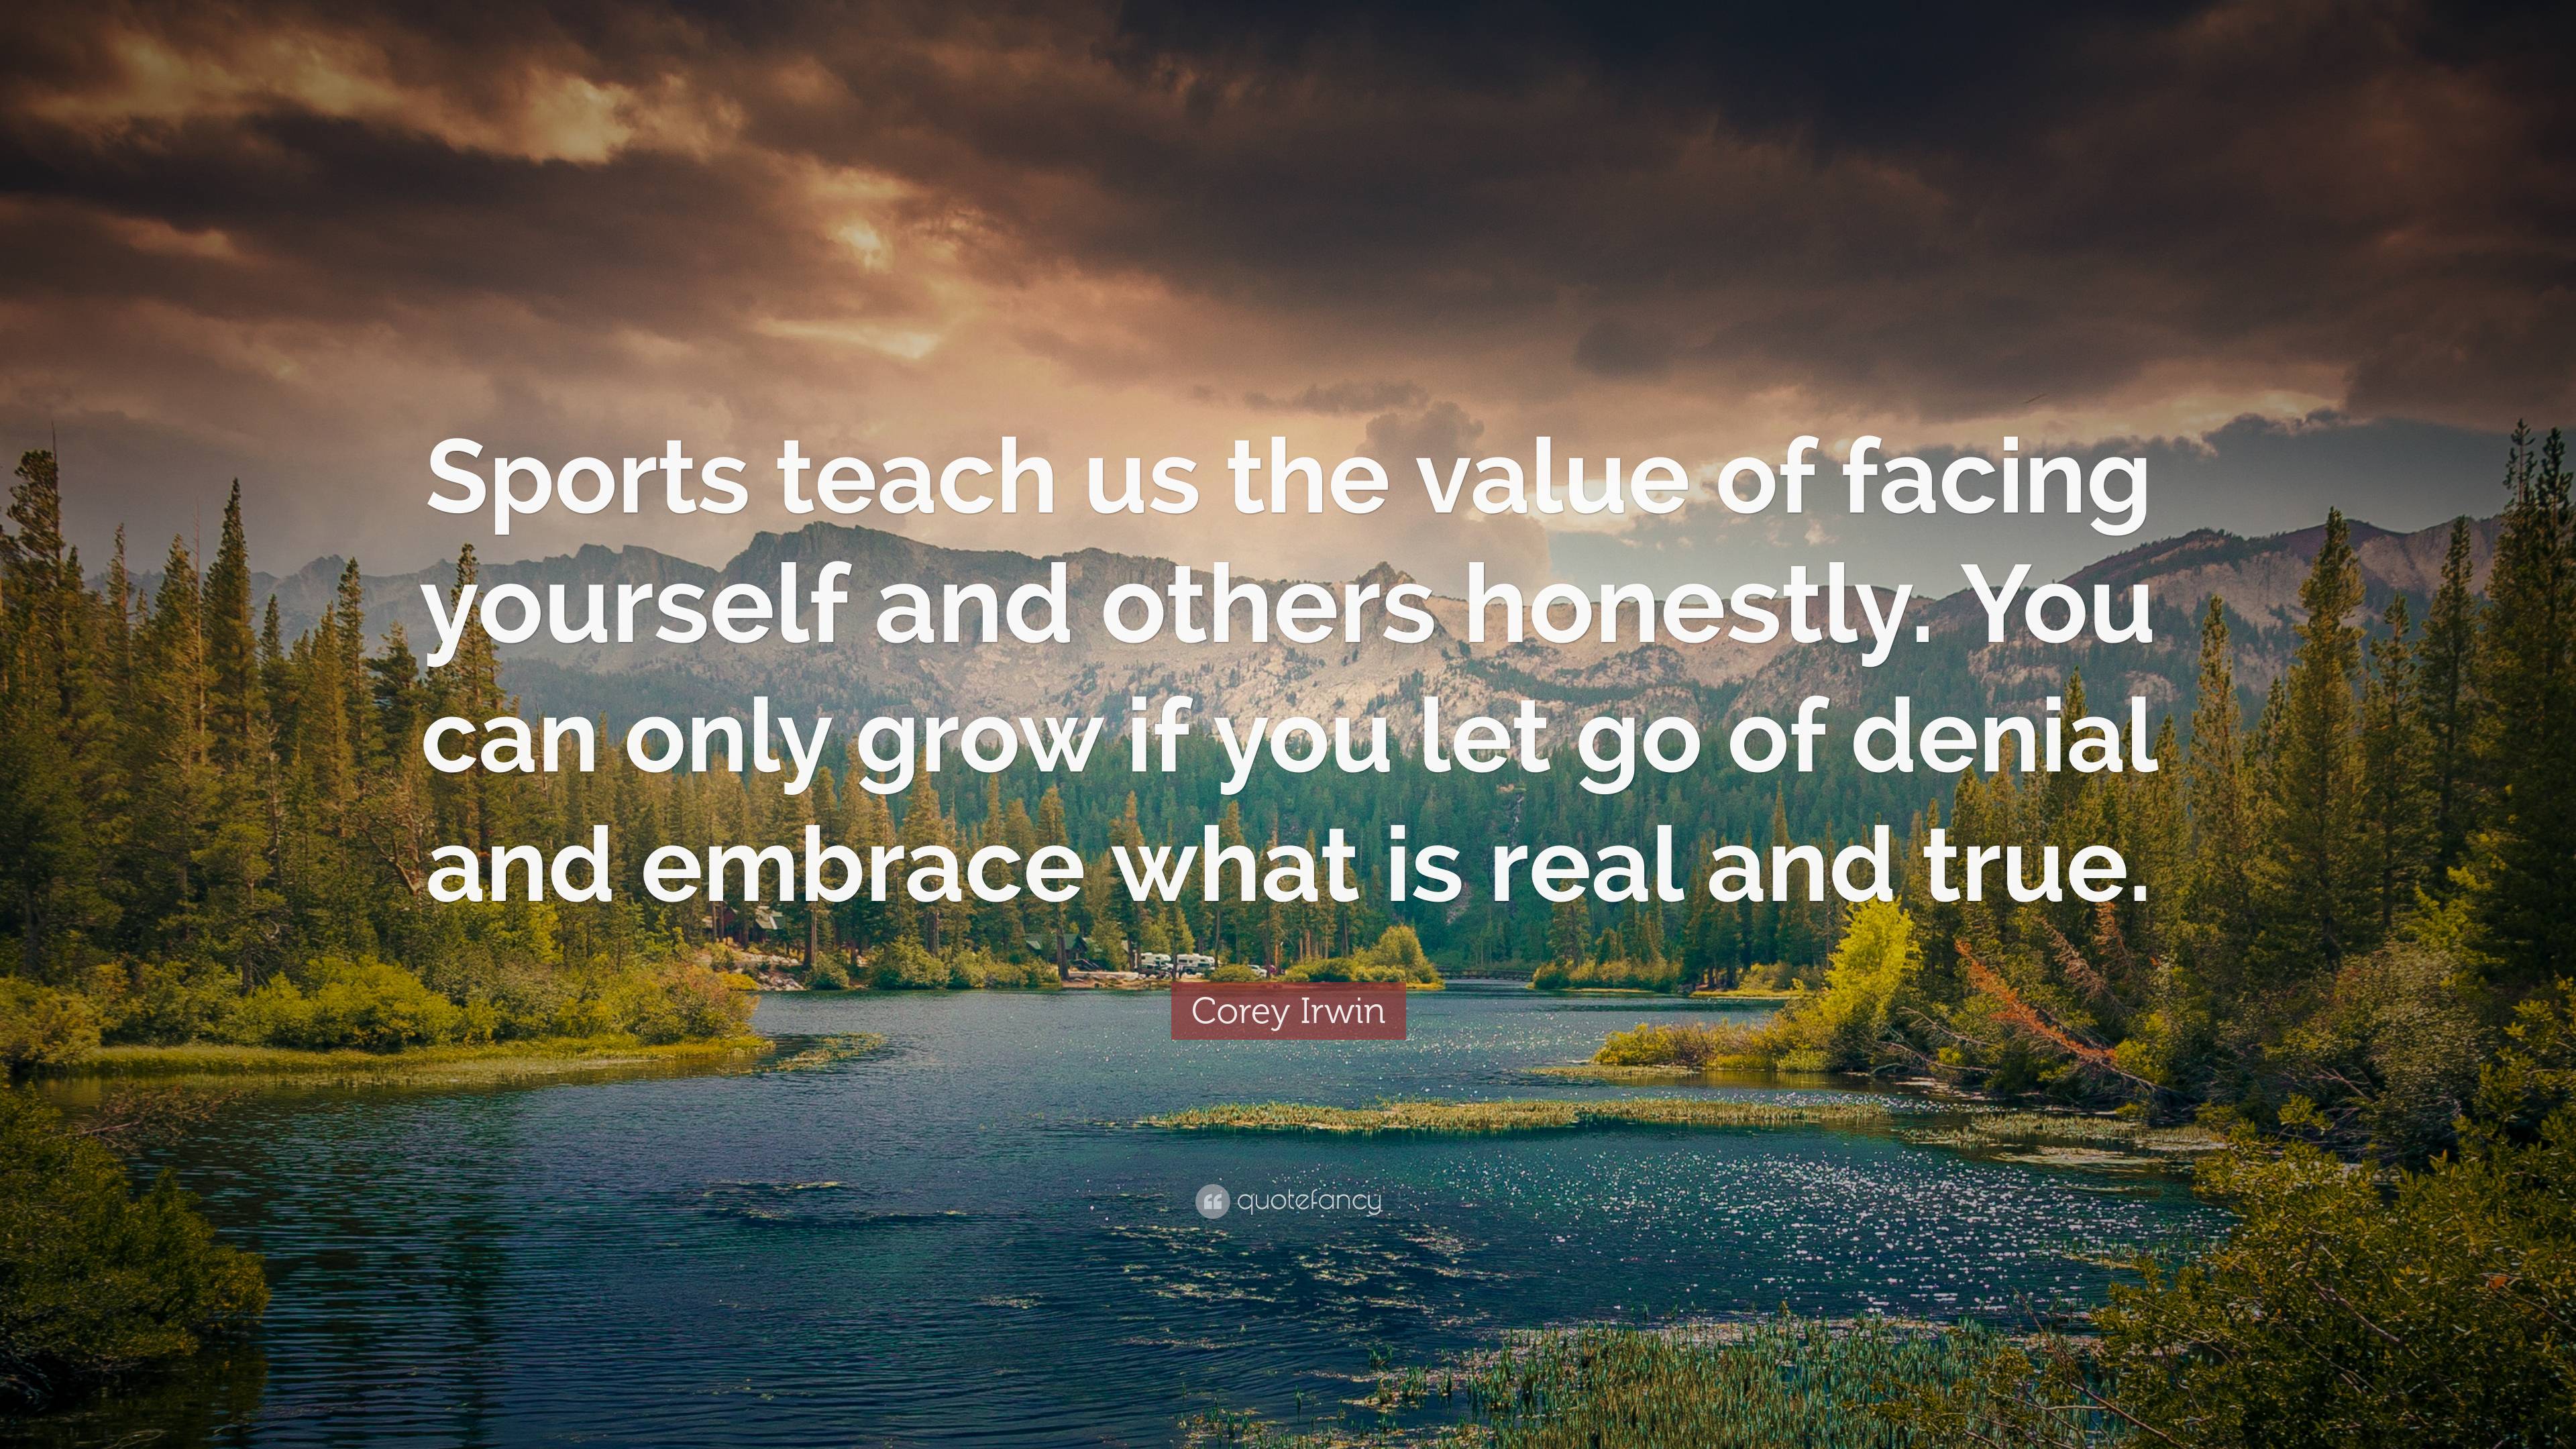 Corey Irwin Quote: “Sports teach us the value of facing yourself and ...